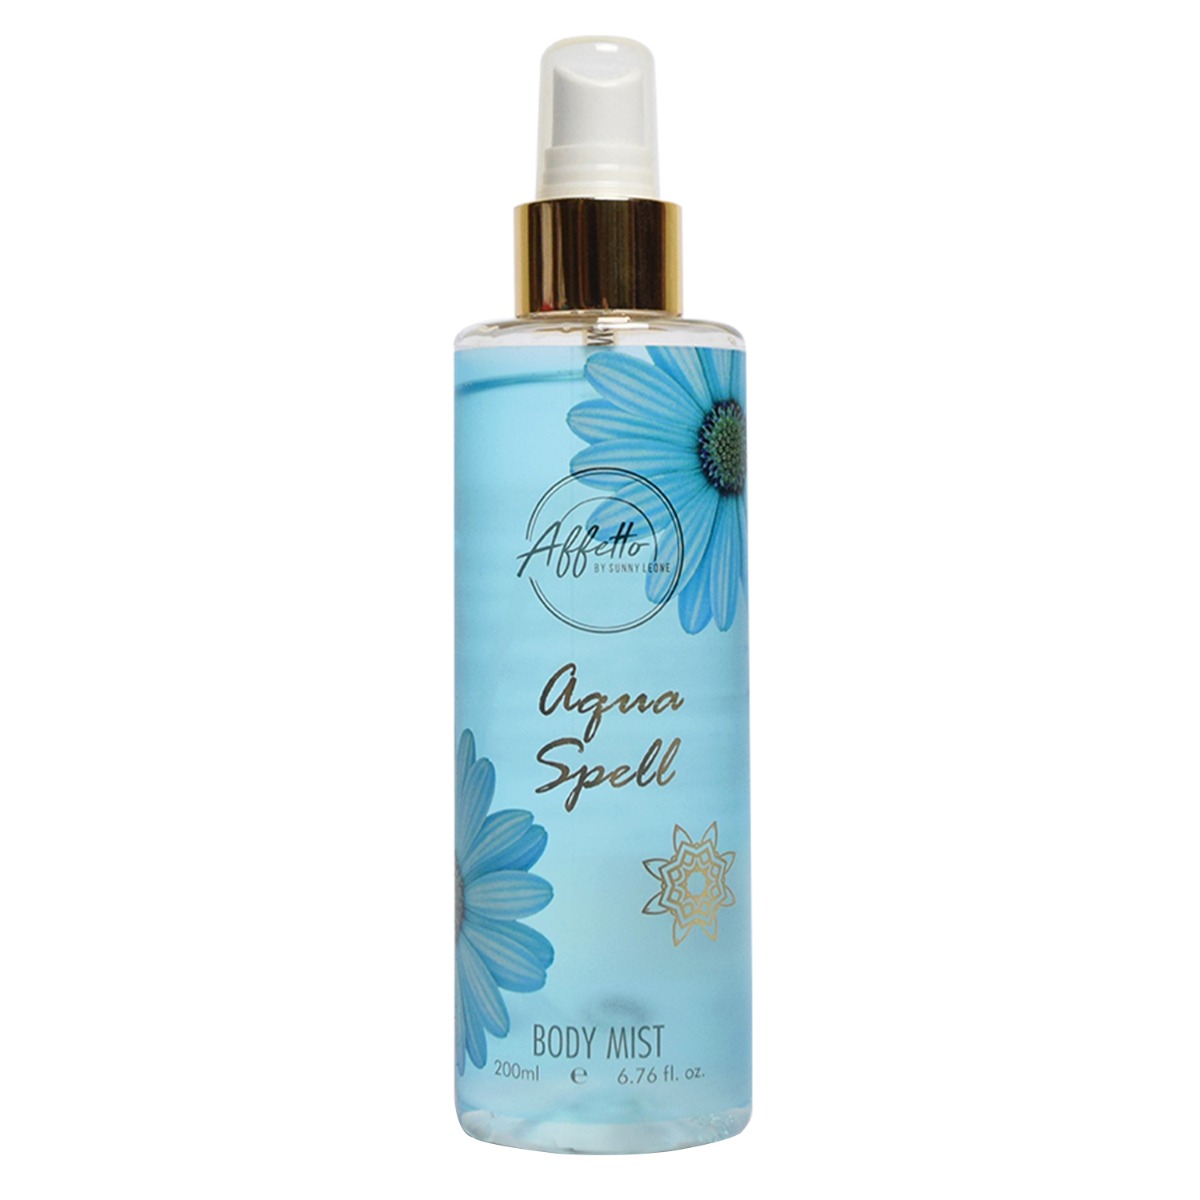 Star Struck by Sunny Leone Affetto by Sunny Leone Body Mist for Her - Aqua Spell, 200ml